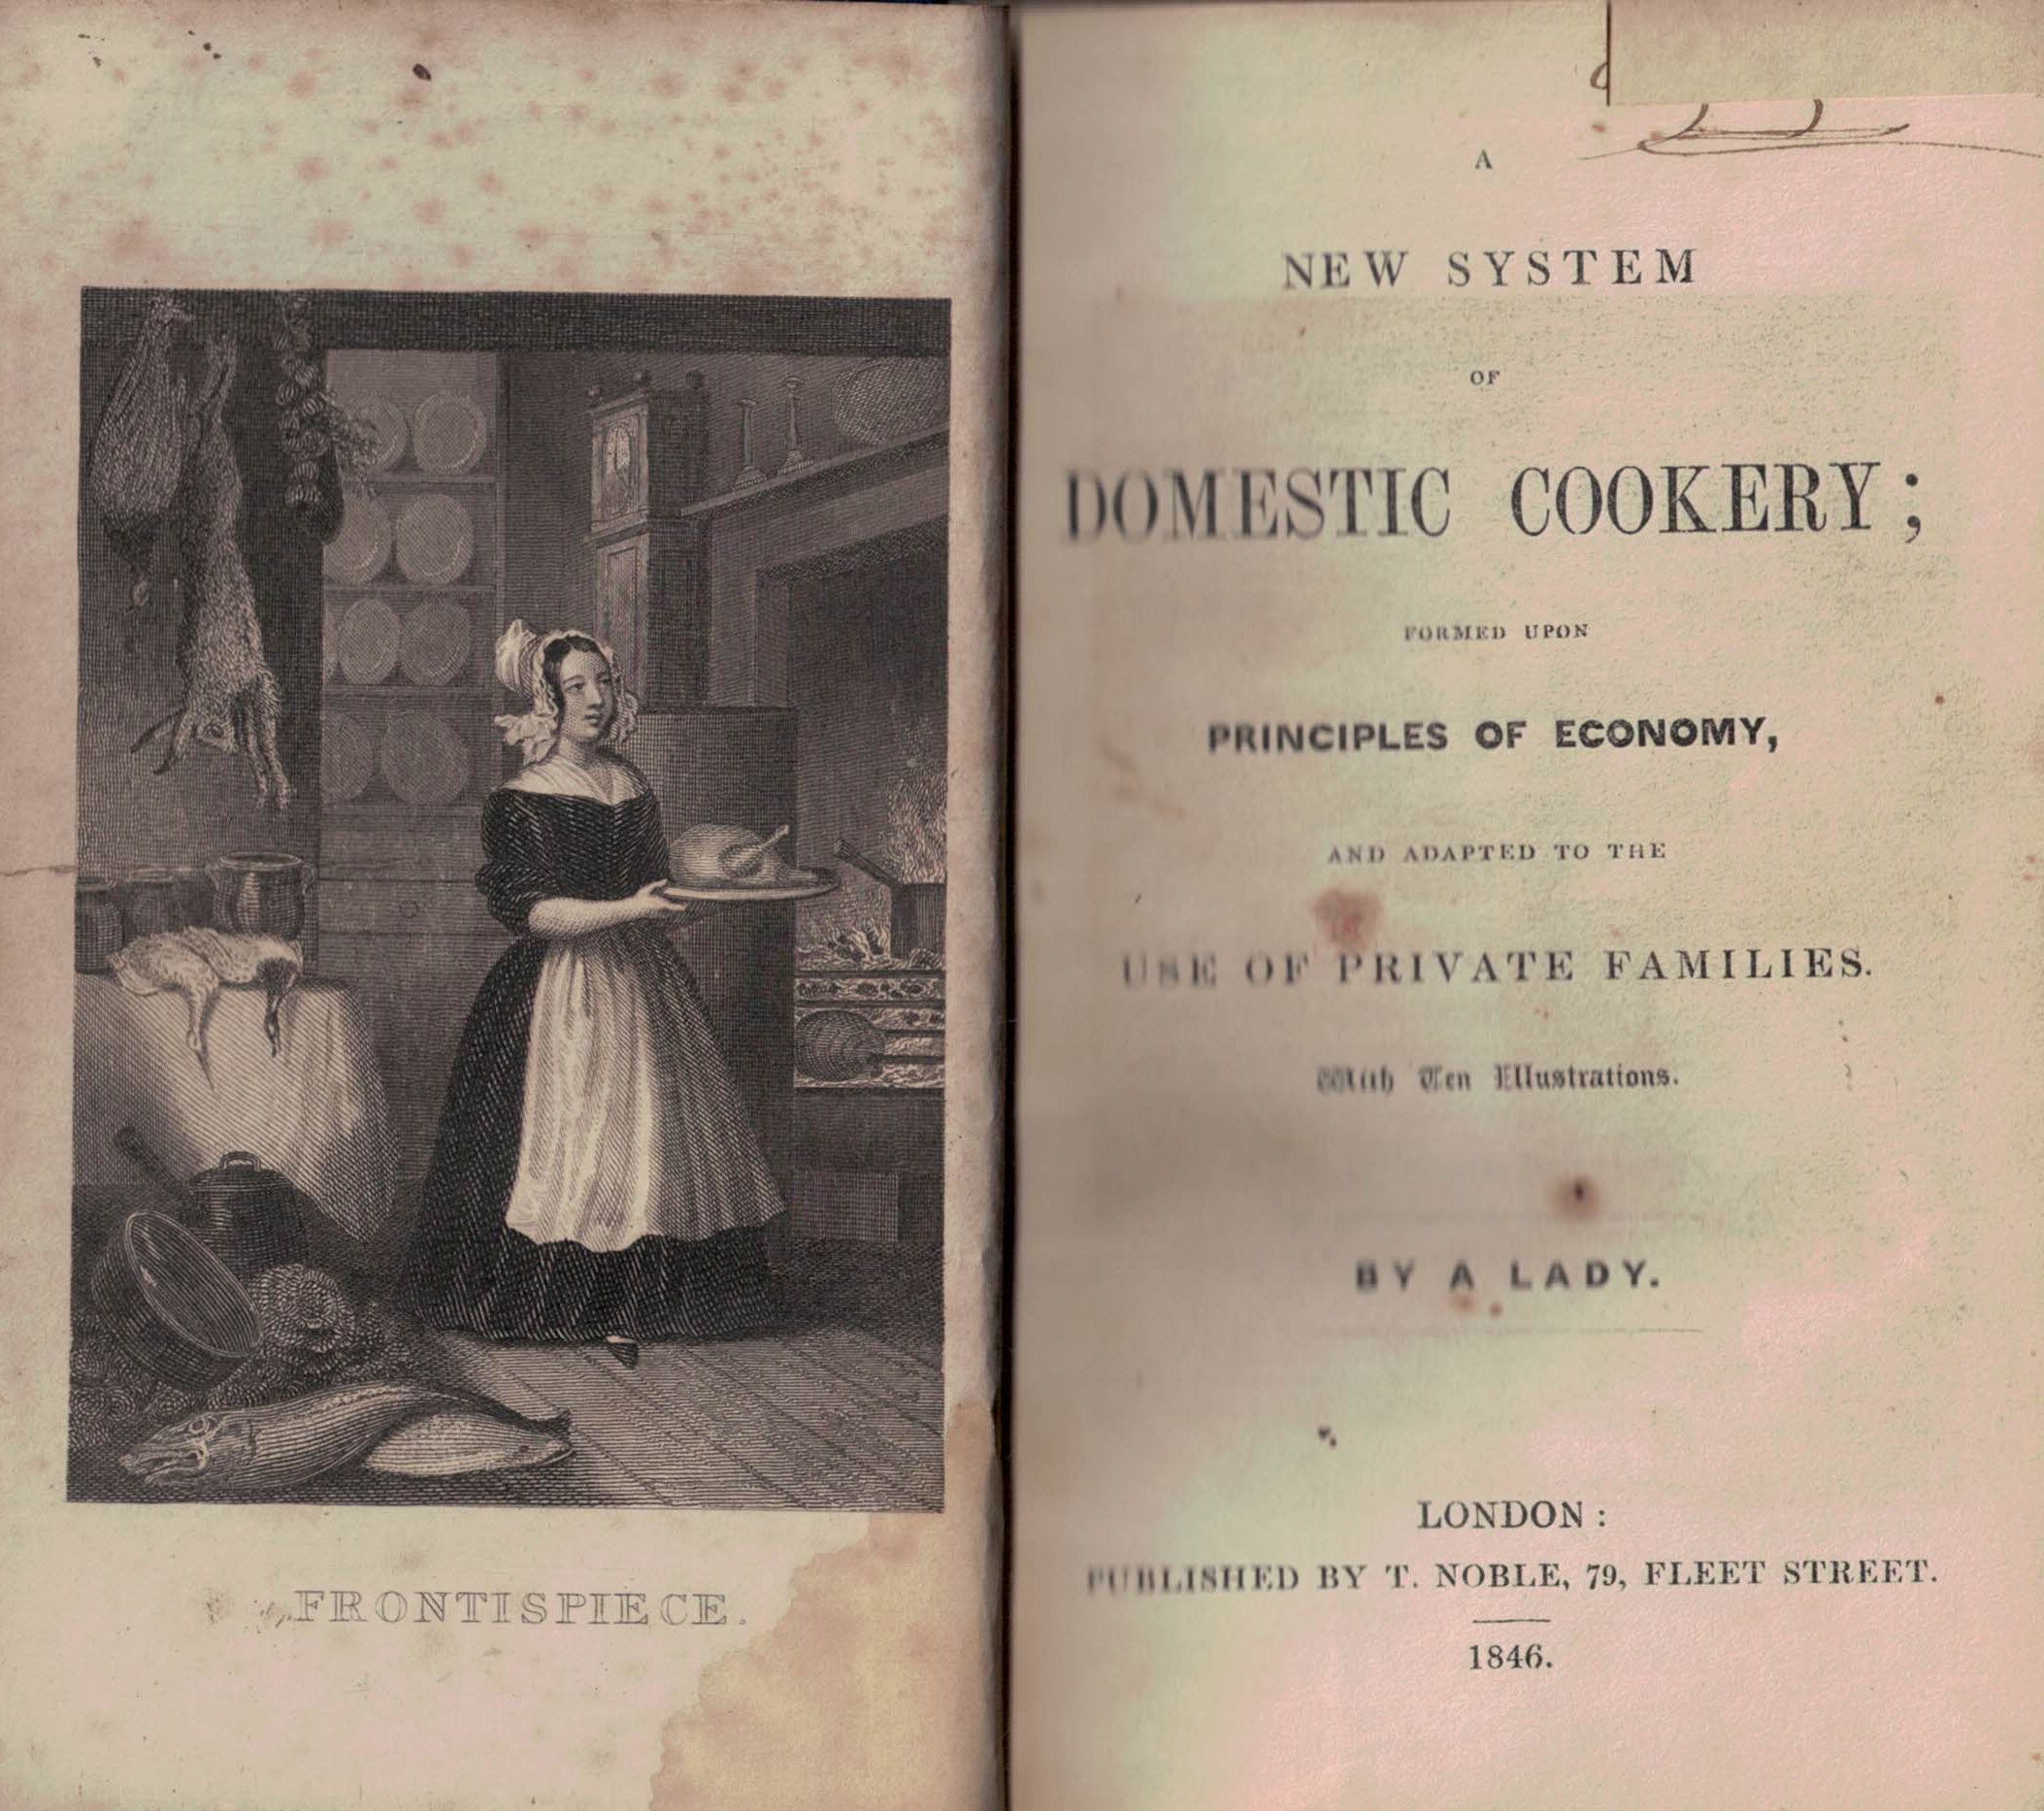 A New System of Domestic Cookery. Formed Upon Principles of Economy, and Adapted to the Use of Private Families.